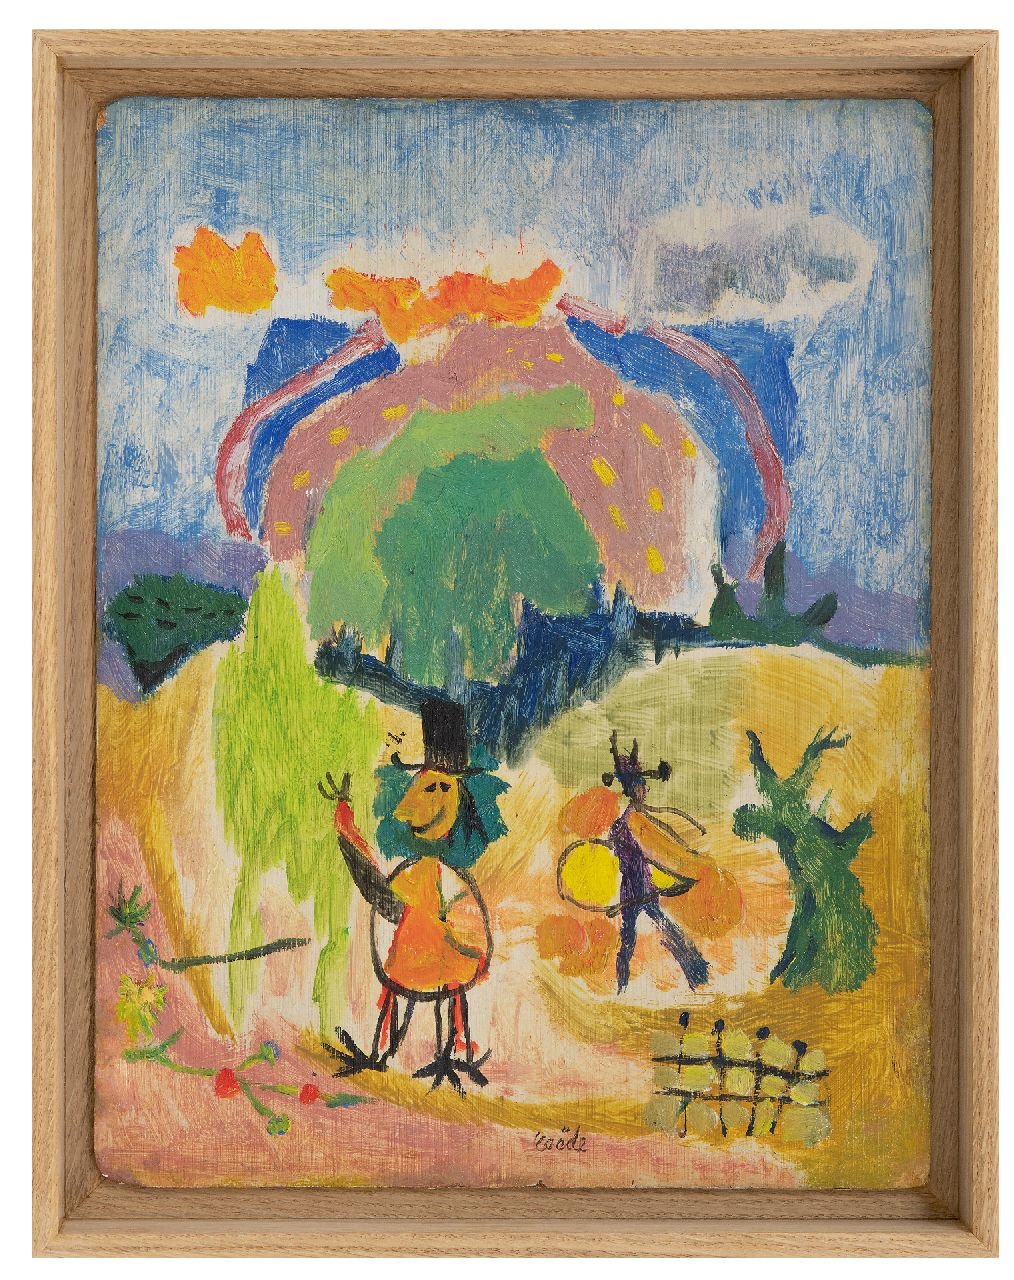 Roëde J.  | Jan Roëde | Paintings offered for sale | Untitled, oil on painter's board 35.0 x 27.0 cm, signed l.c. and to be dated ca. 1946-1948